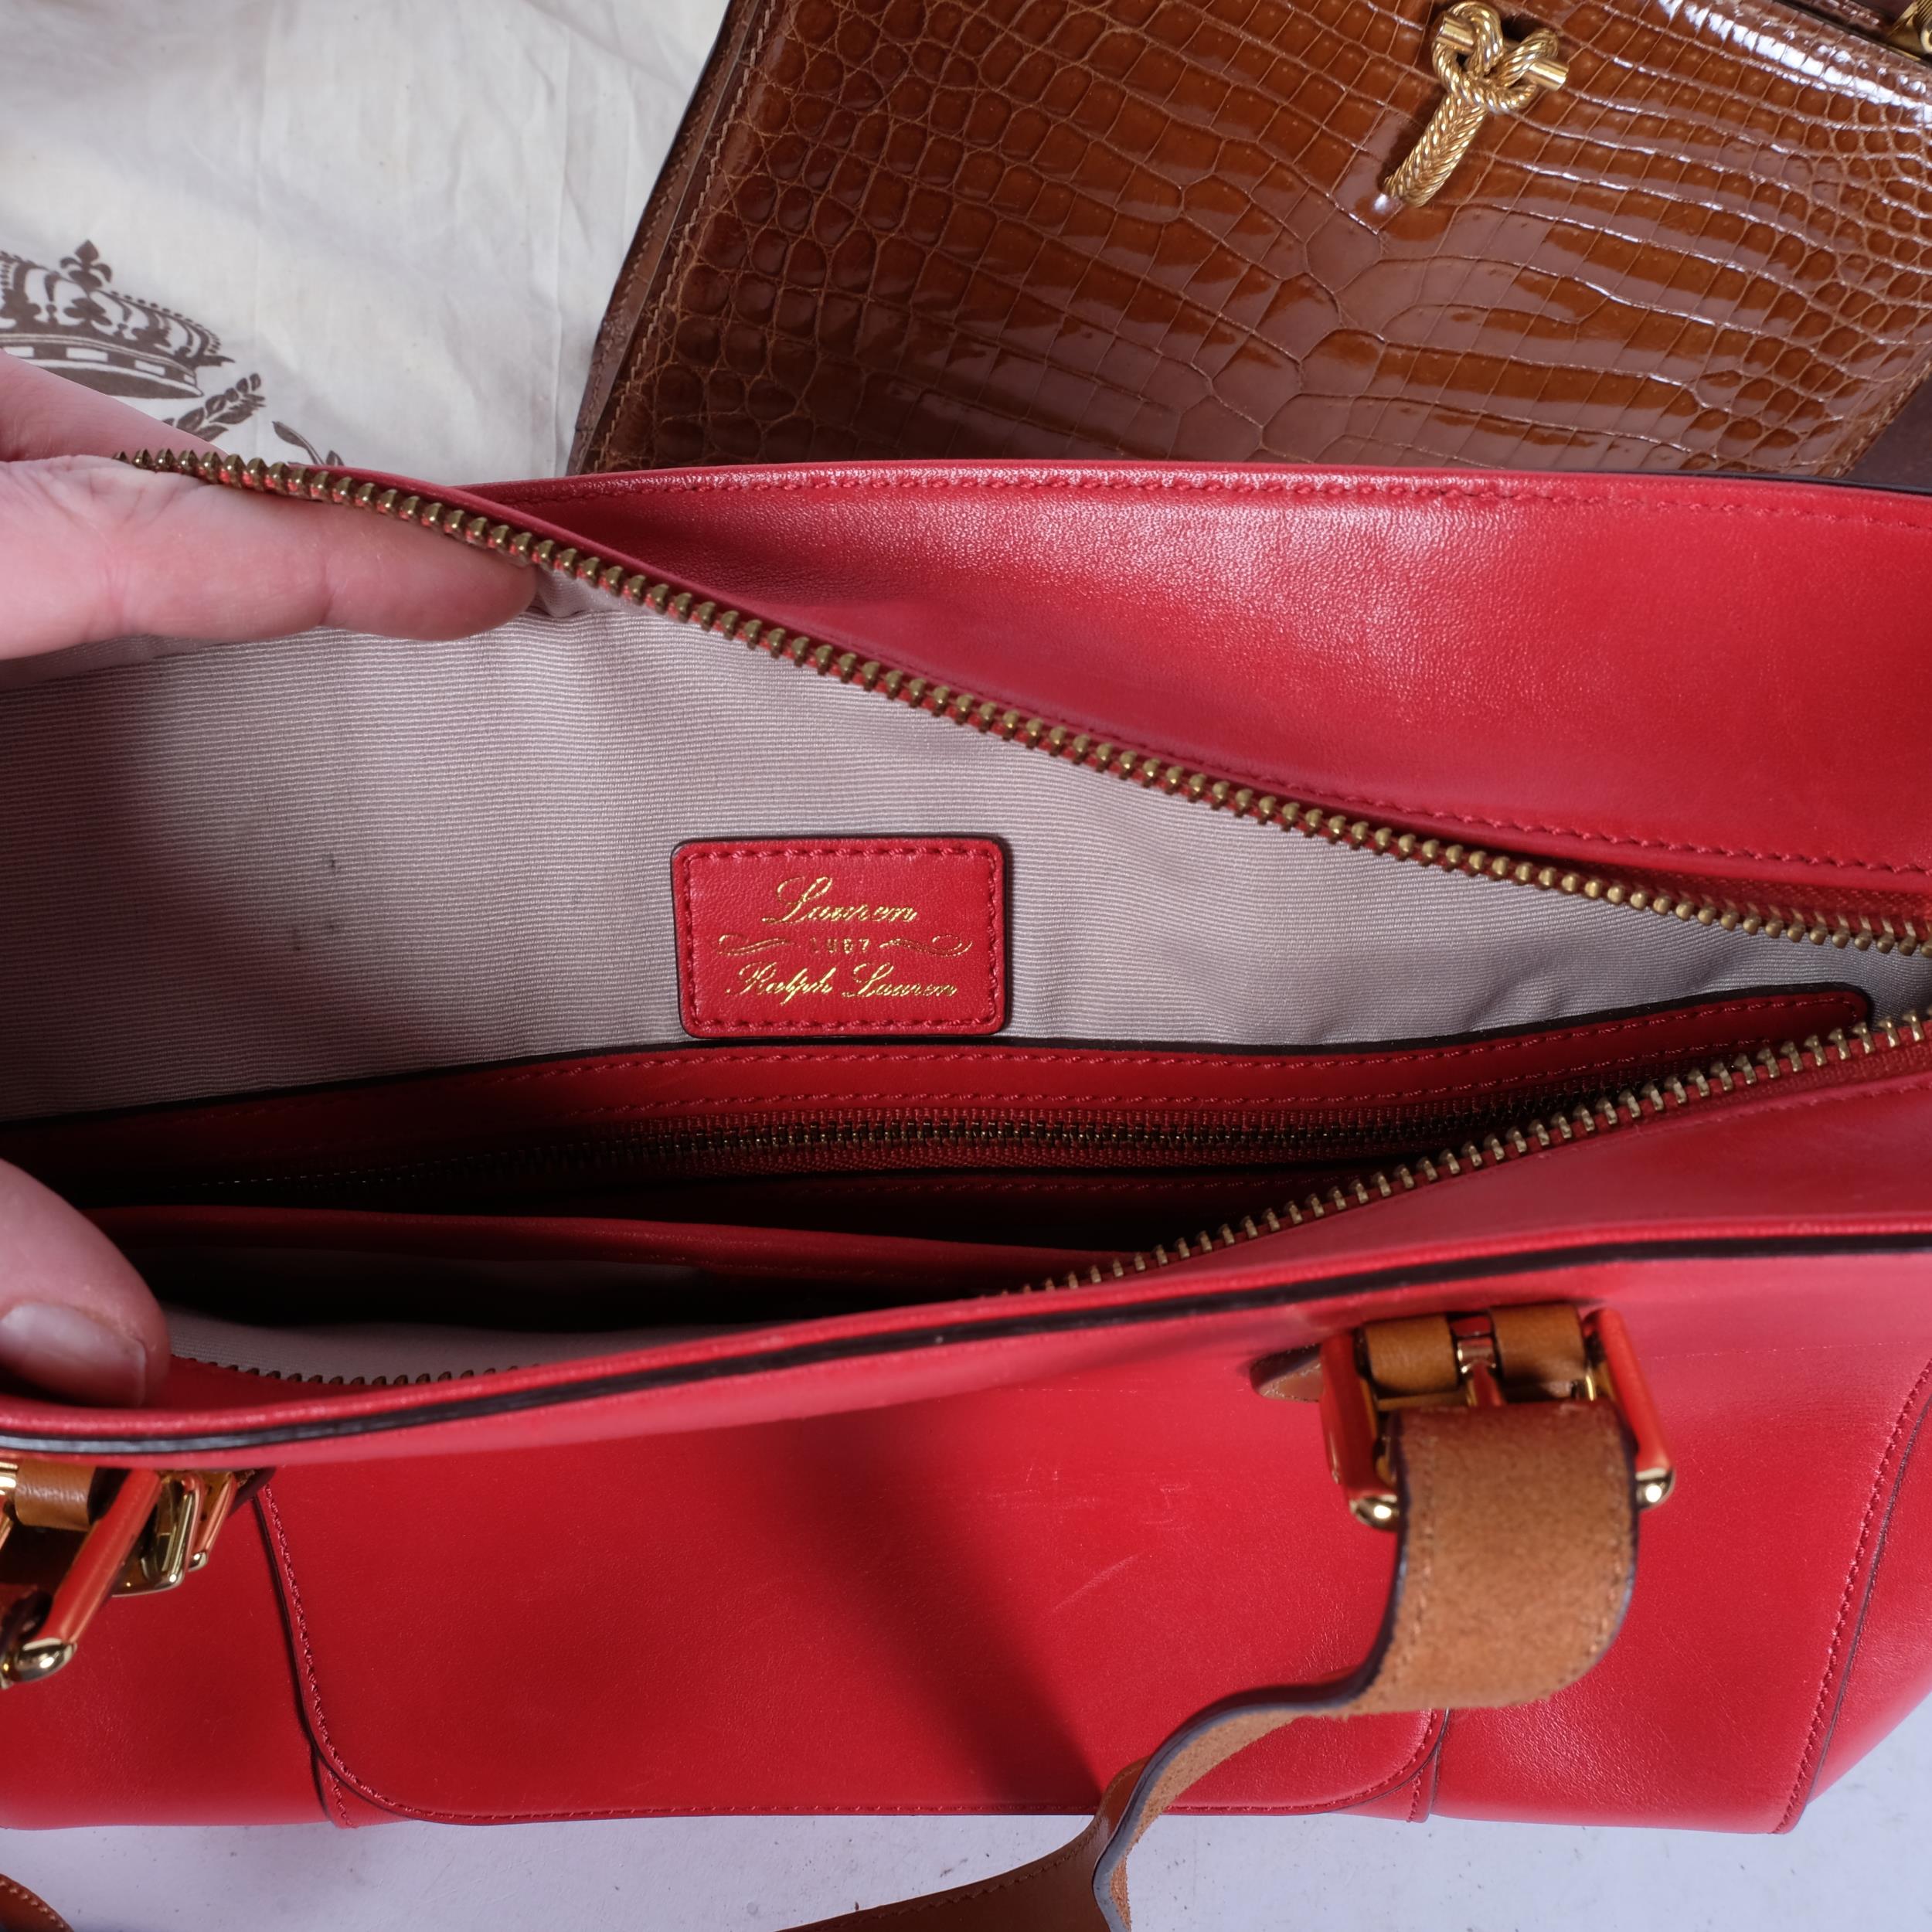 3 leather handbags, including 1 marked Ralph Lauren, and a leather briefcase - Image 2 of 2